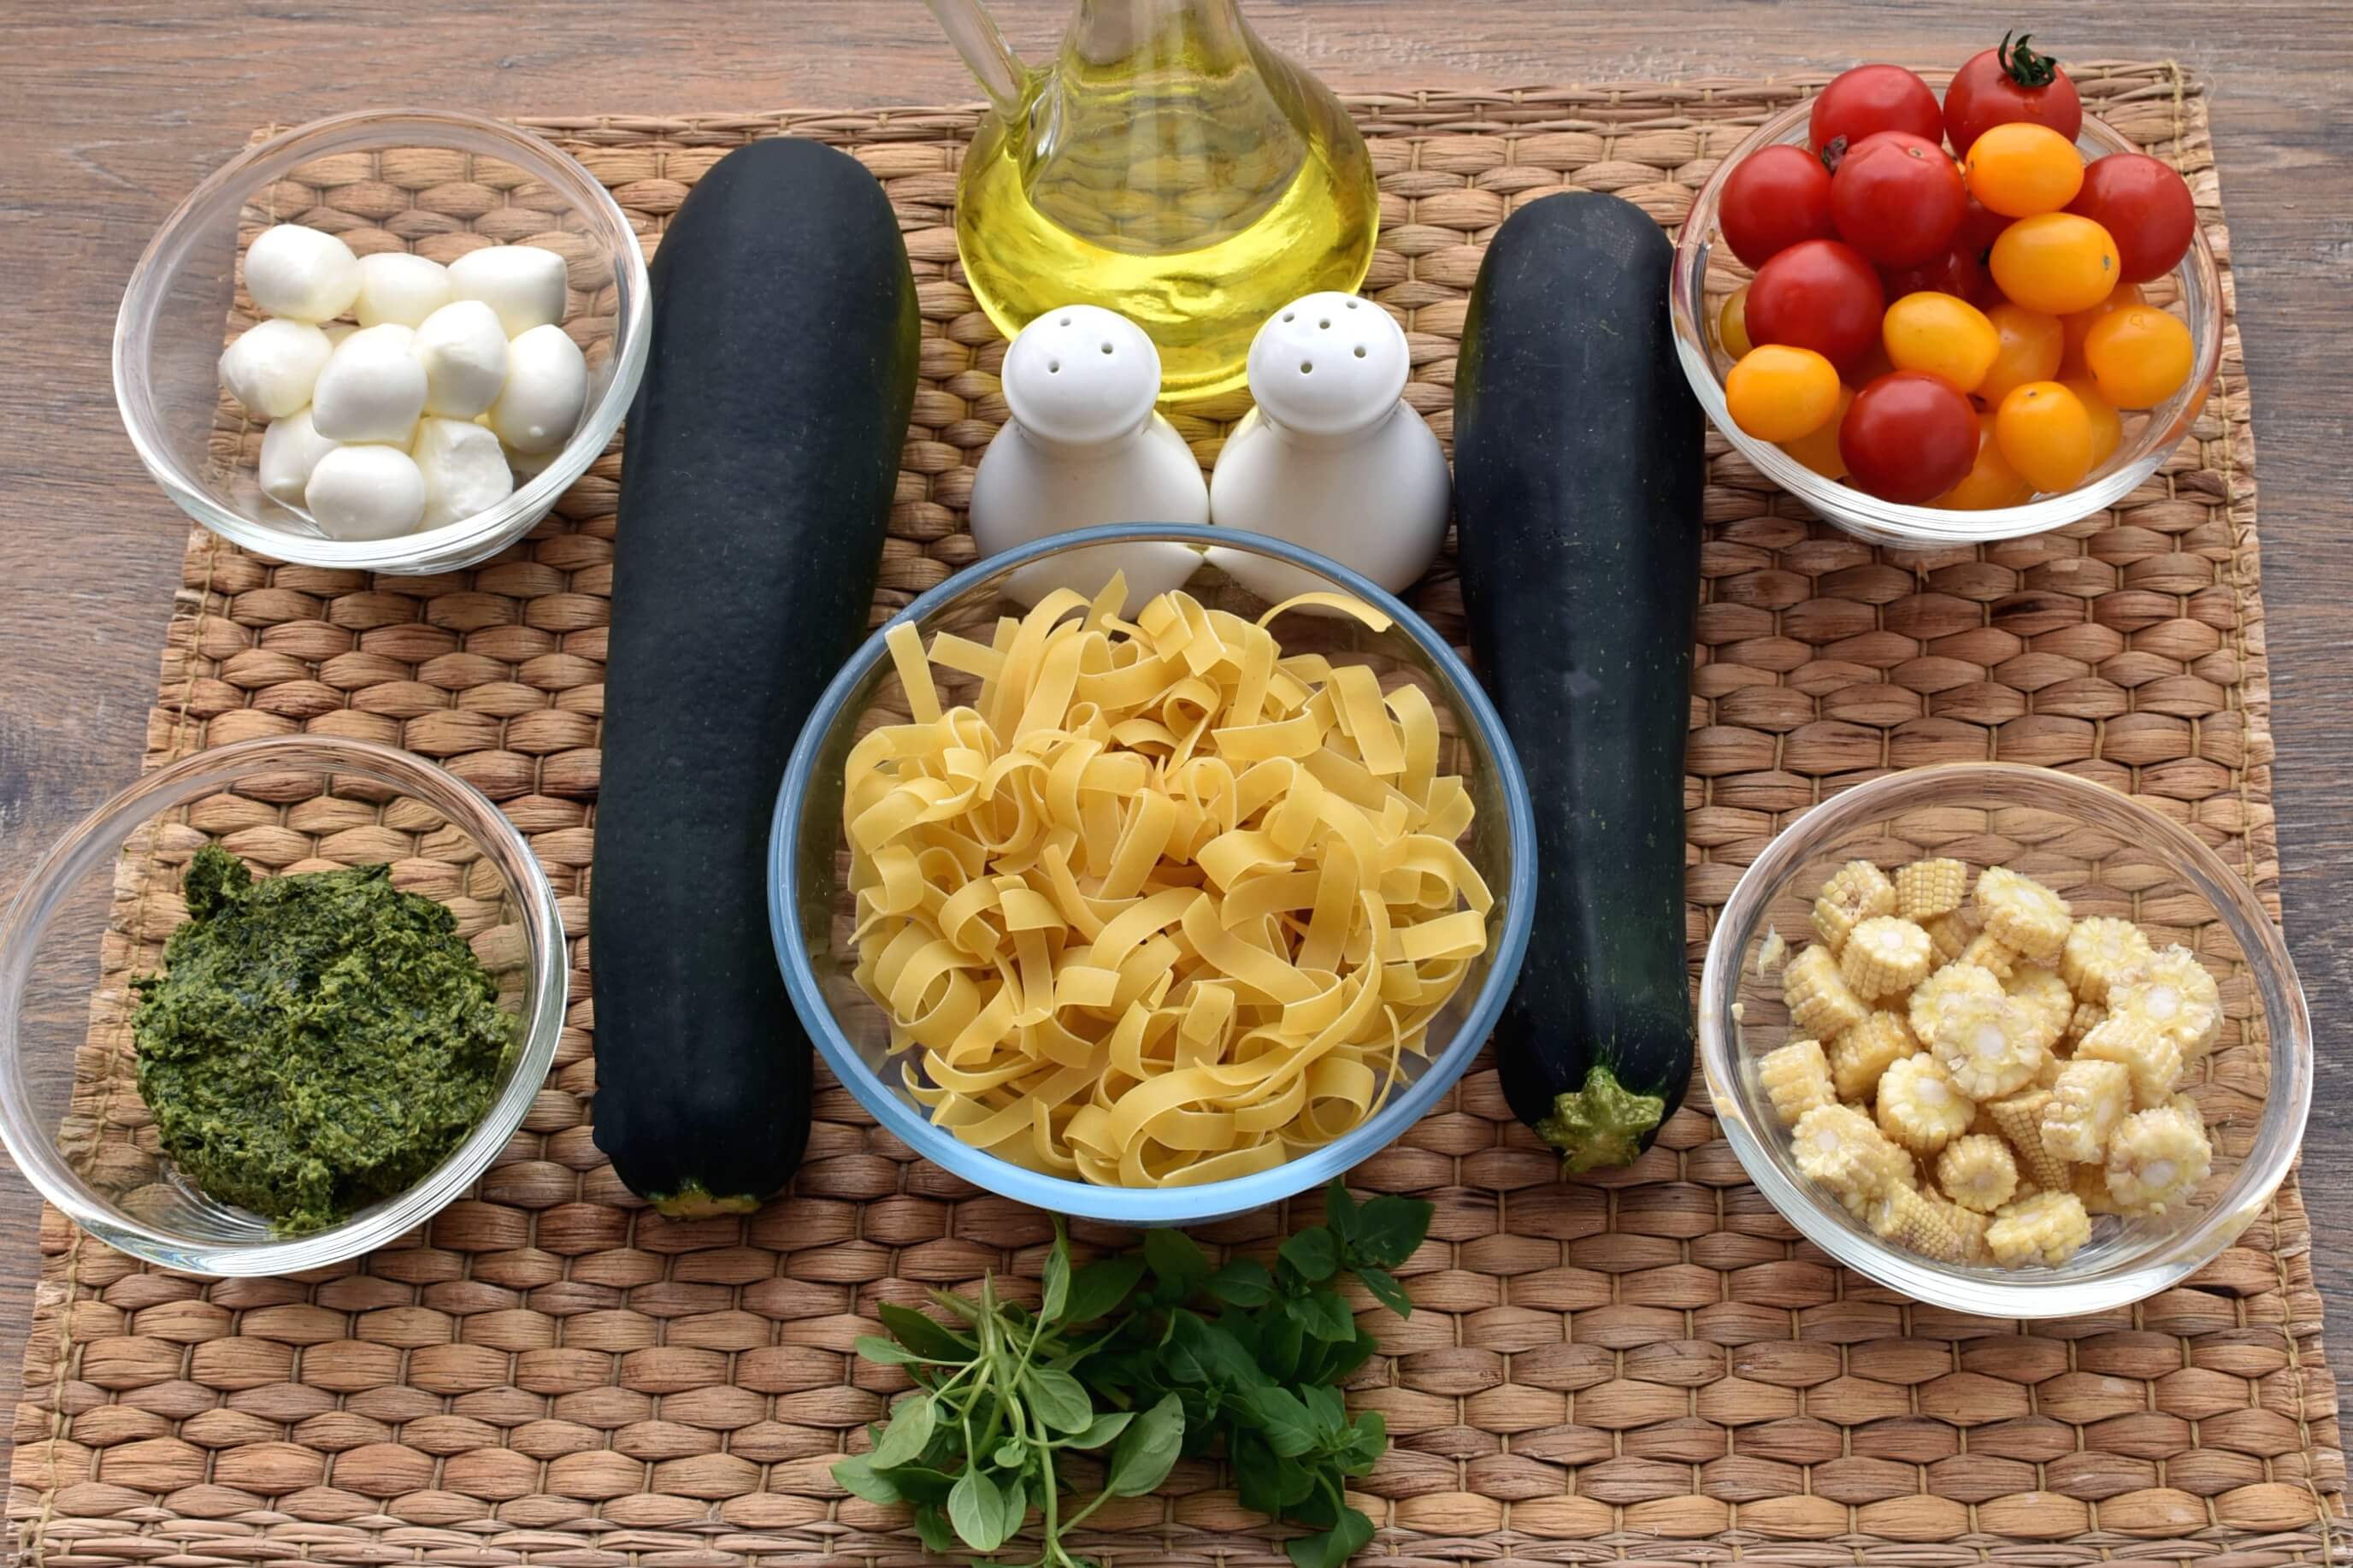 Ingridiens for Pasta with Tomatoes Zucchini and Pesto